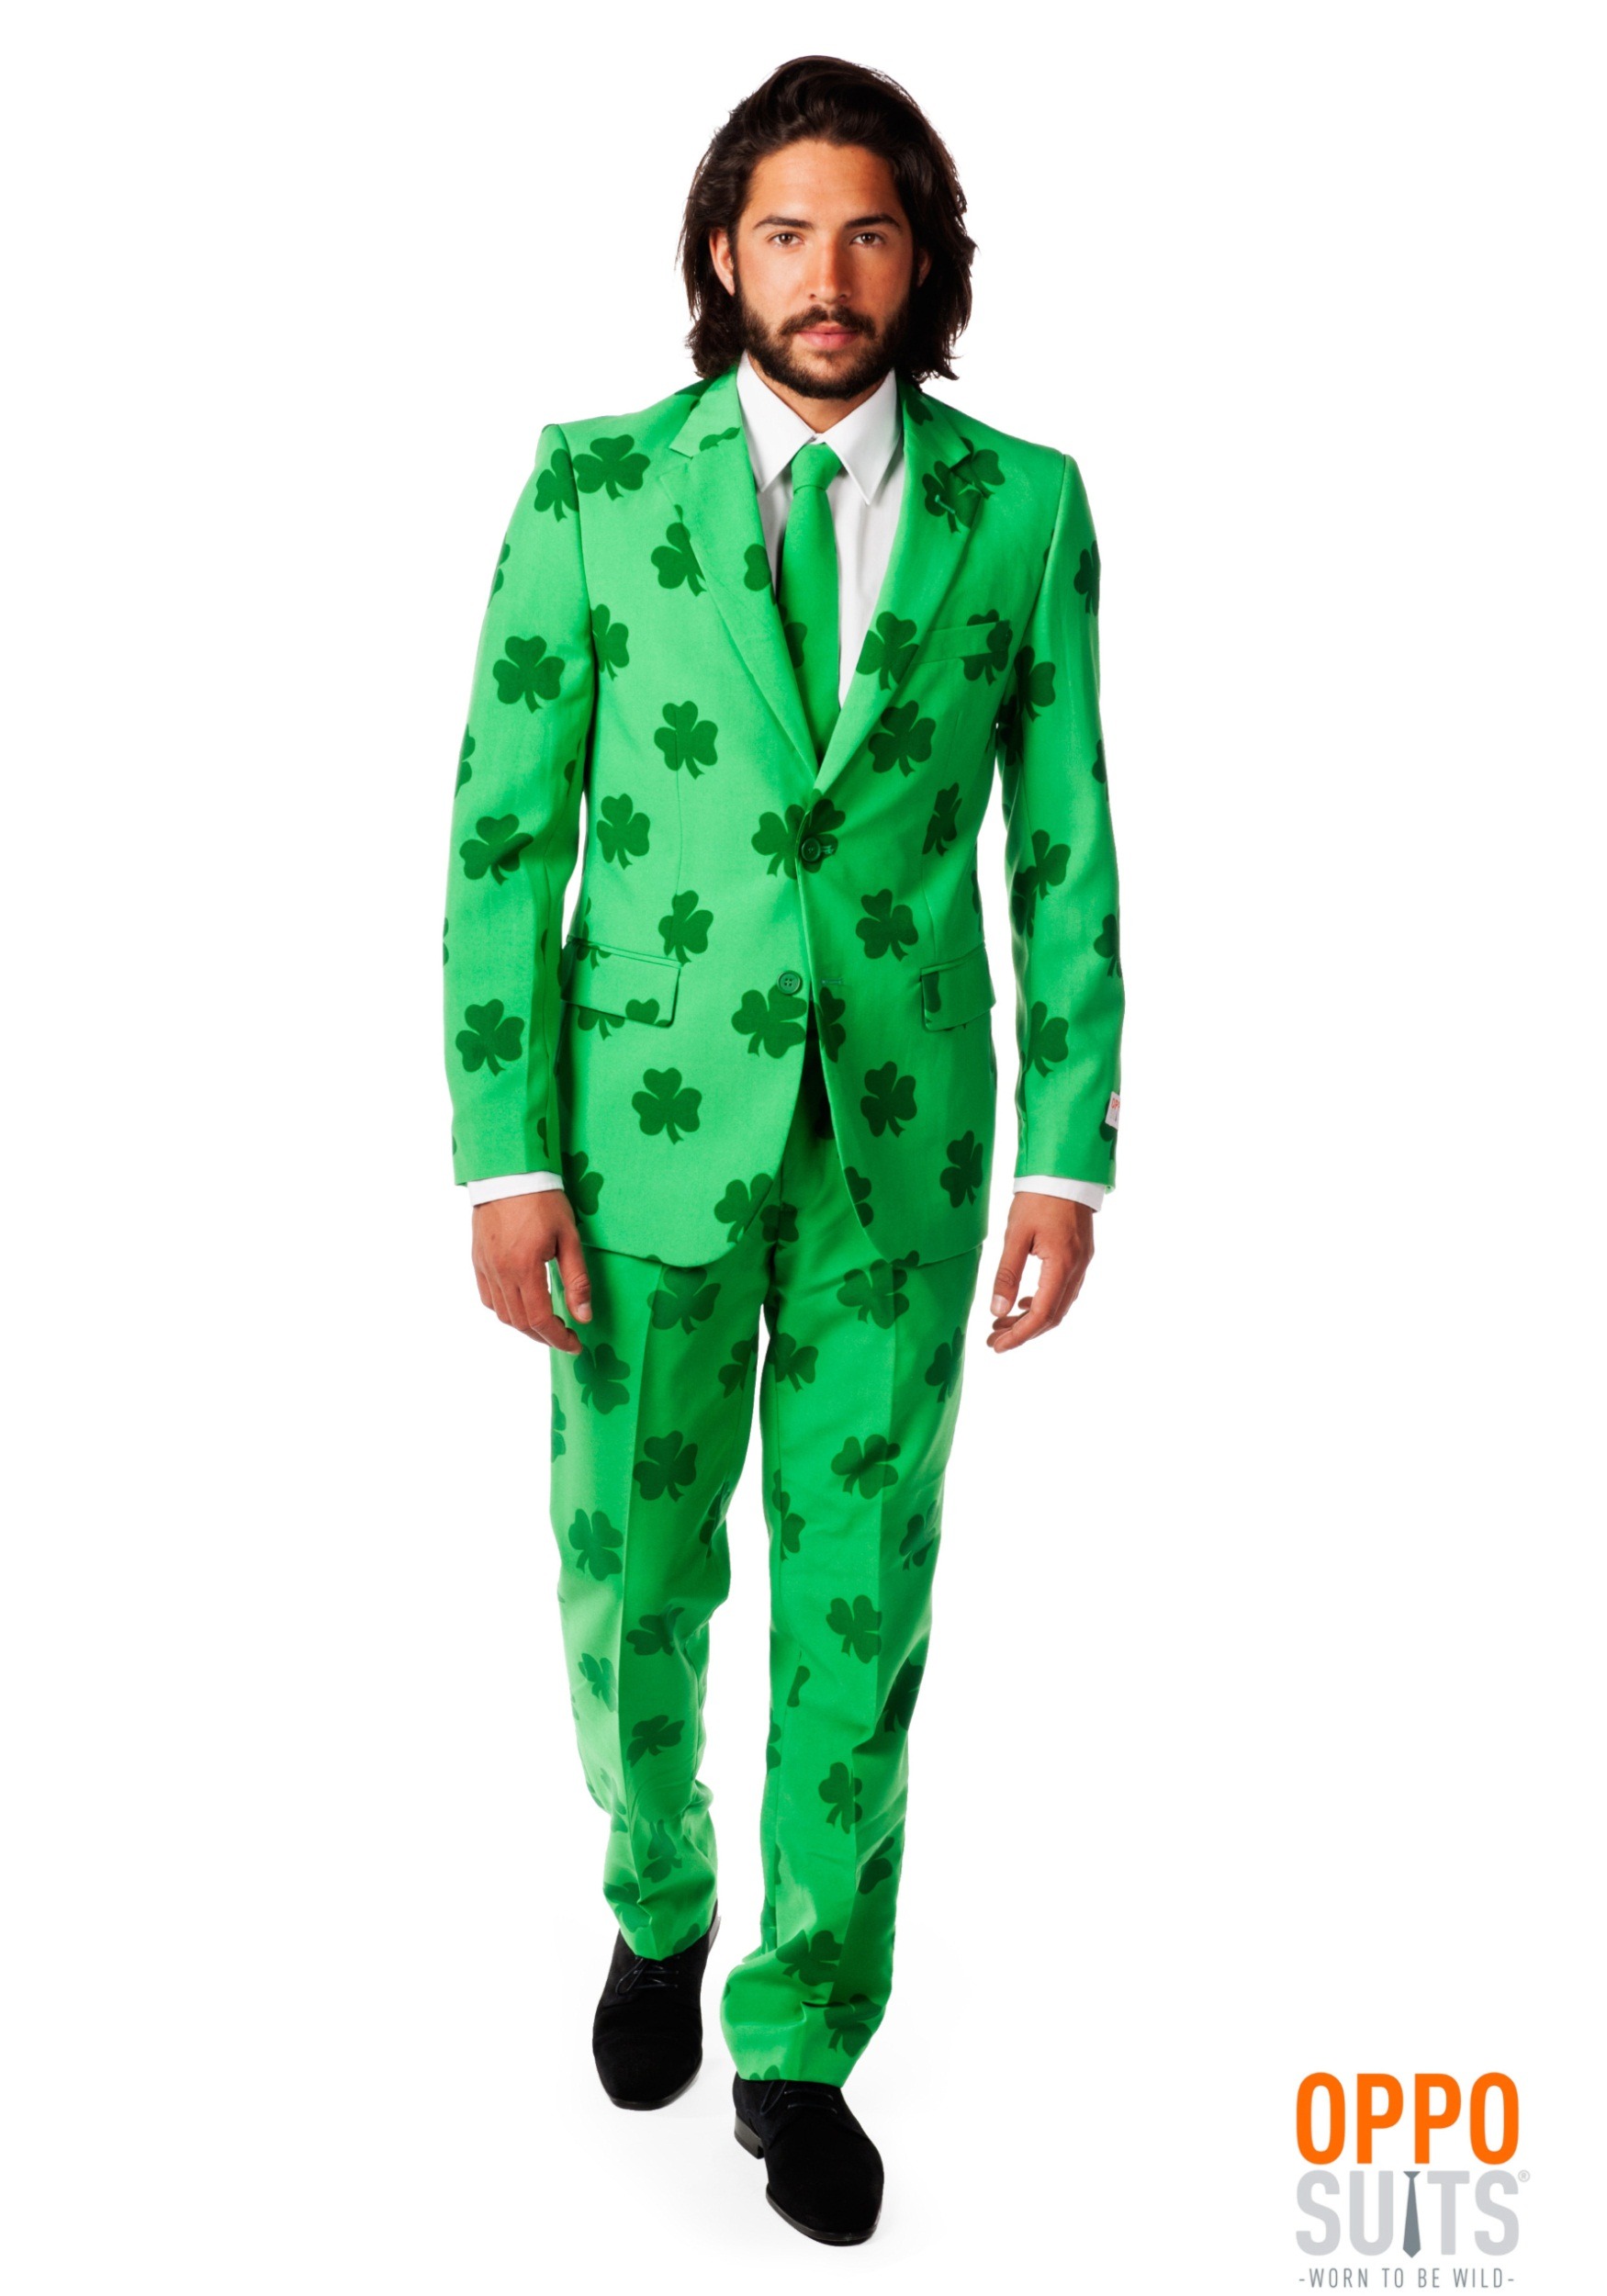 Men’s OppoSuits Green St. Patrick’s Day Costume Suit